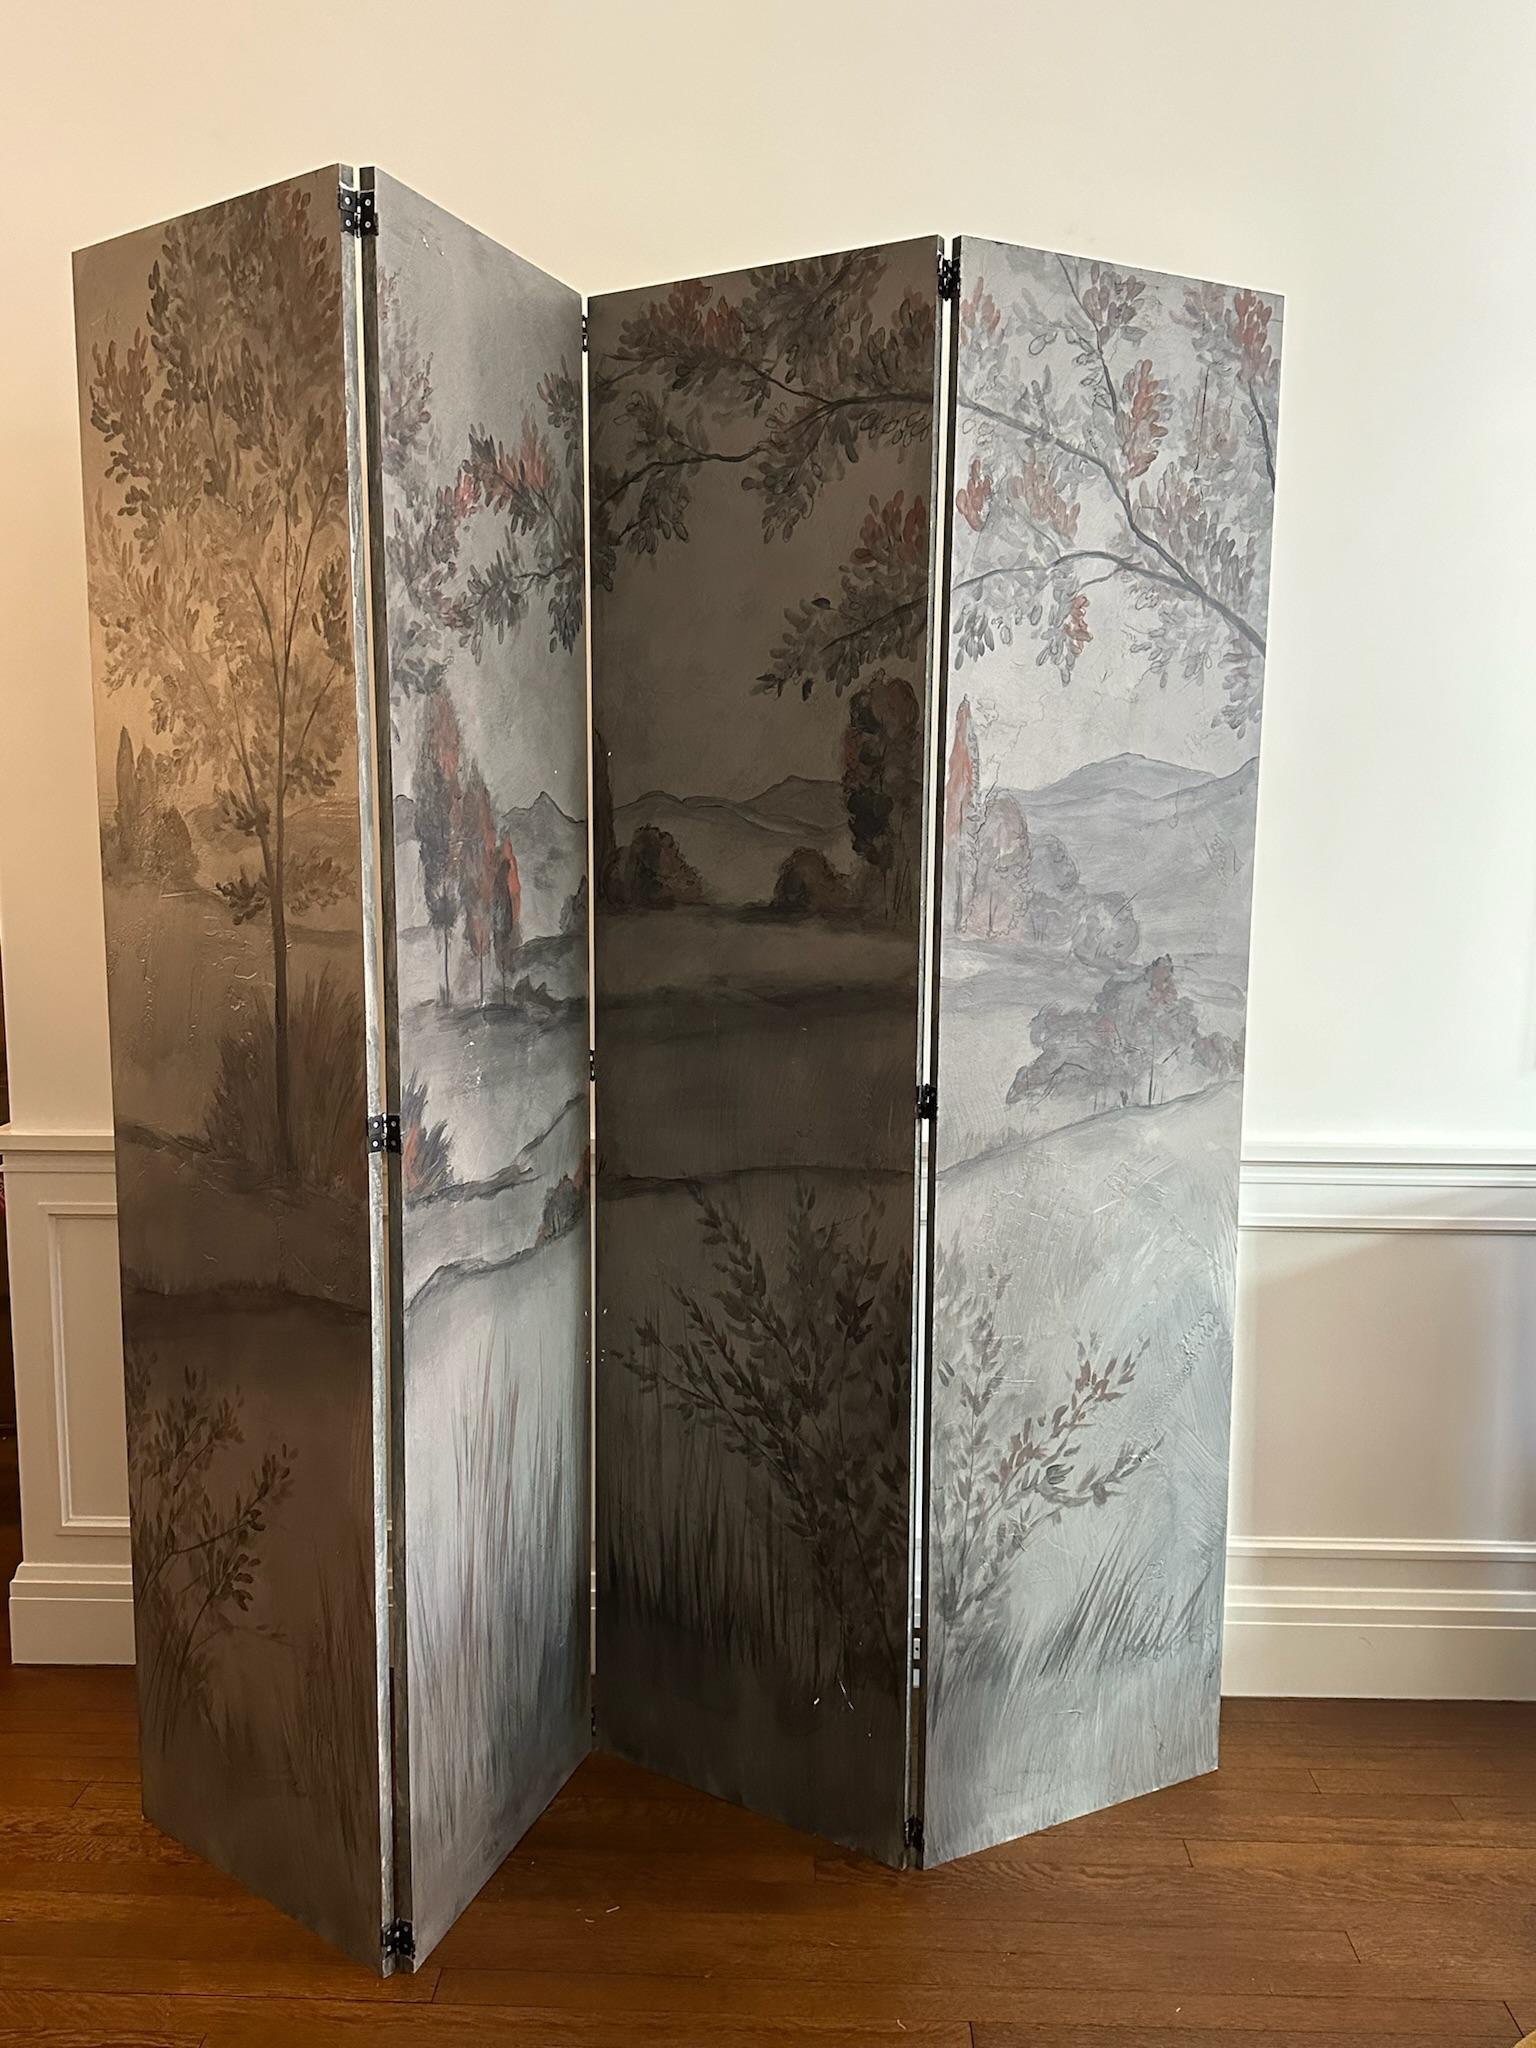 This screen is comprised of four panels whose structure is in wood and conjoined by metal hinges. The panels are covered with a scenic landscape painted by James Mobley in Los Angeles.